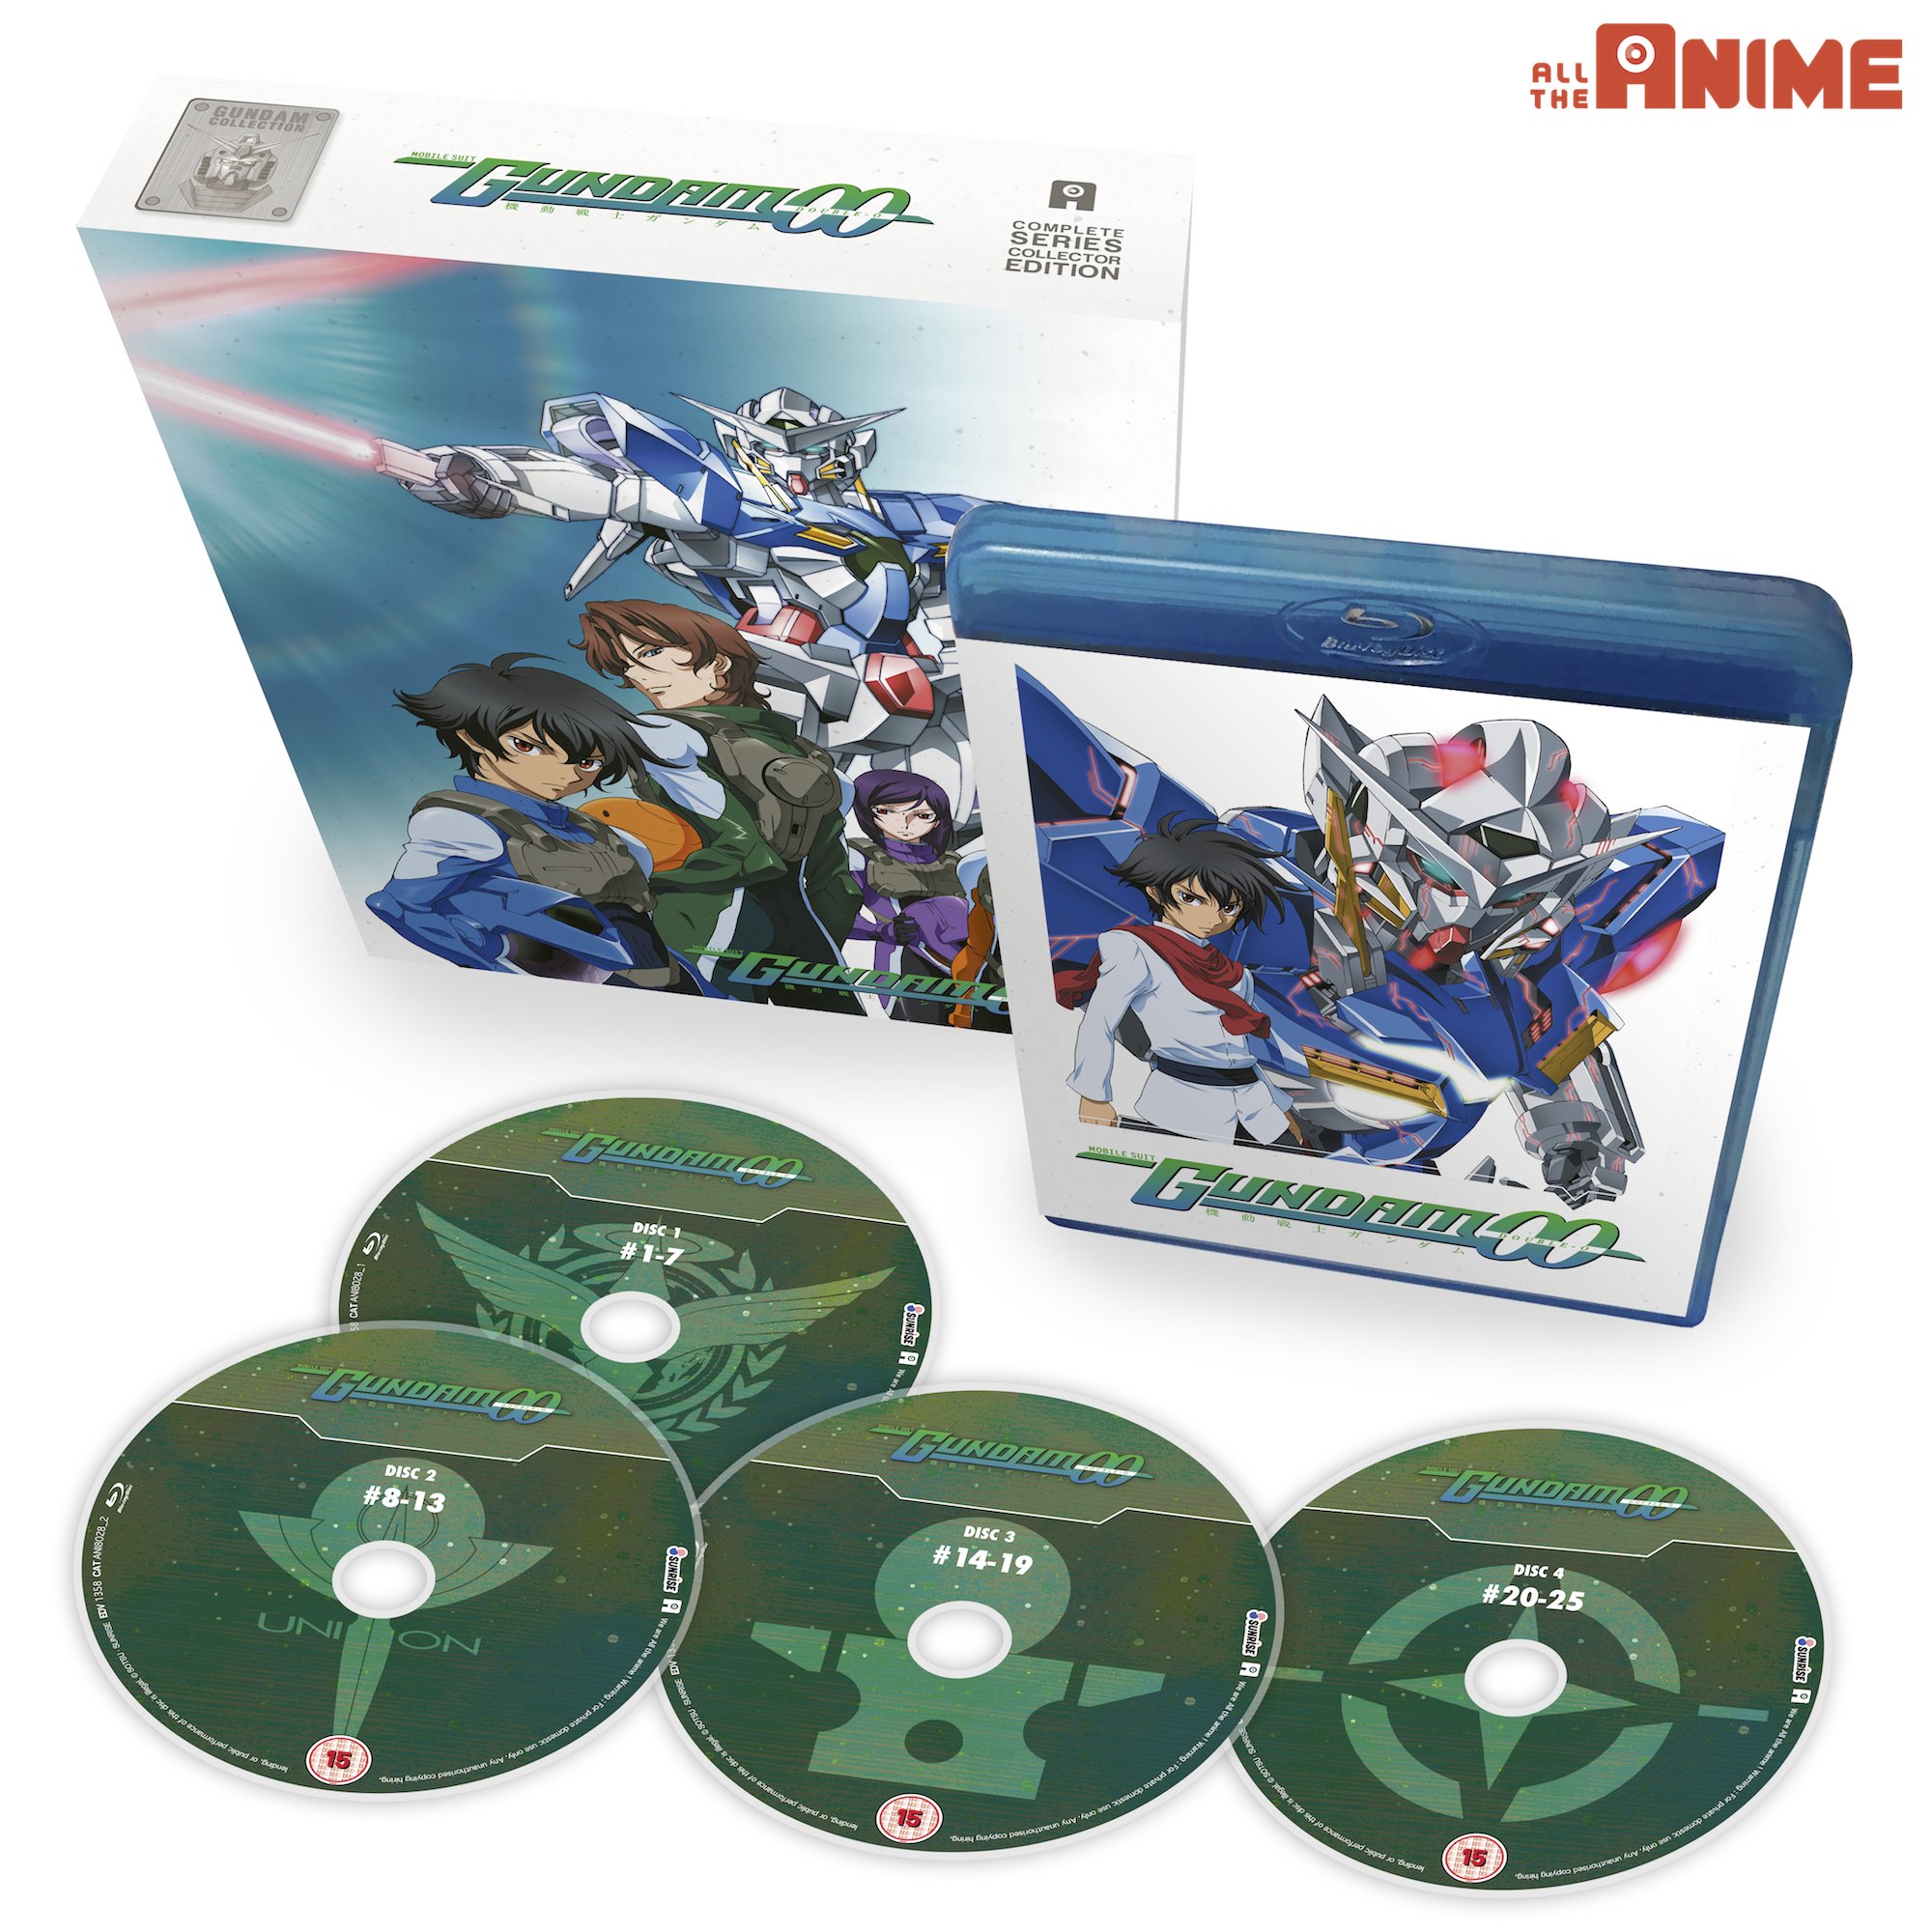 Anime Limited Reveals Mobile Suit Gundam 00 Uk Blu Ray Release Date Packaging Details Anime Uk News